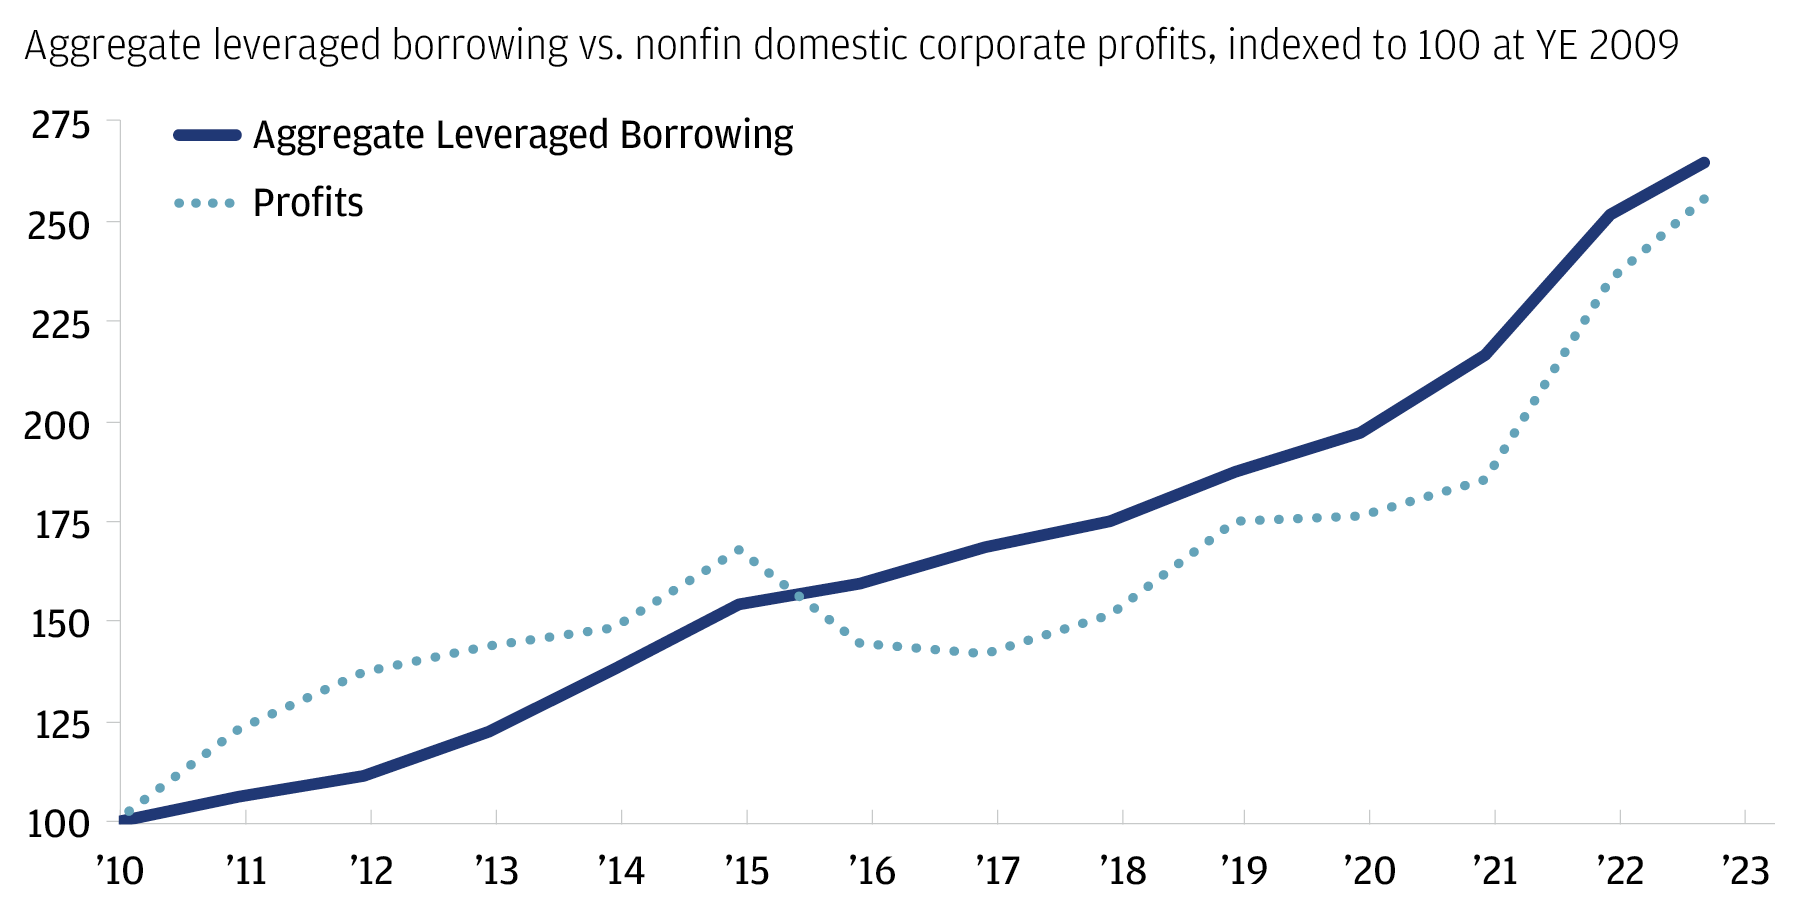 This chart compares domestic nonfinancial corporate profits and aggregate levered borrowing (equal to North American private credit AUM excluding dry powder, leveraged loans outstanding and high yield debt outstanding) both indexed to 100 in 2010.